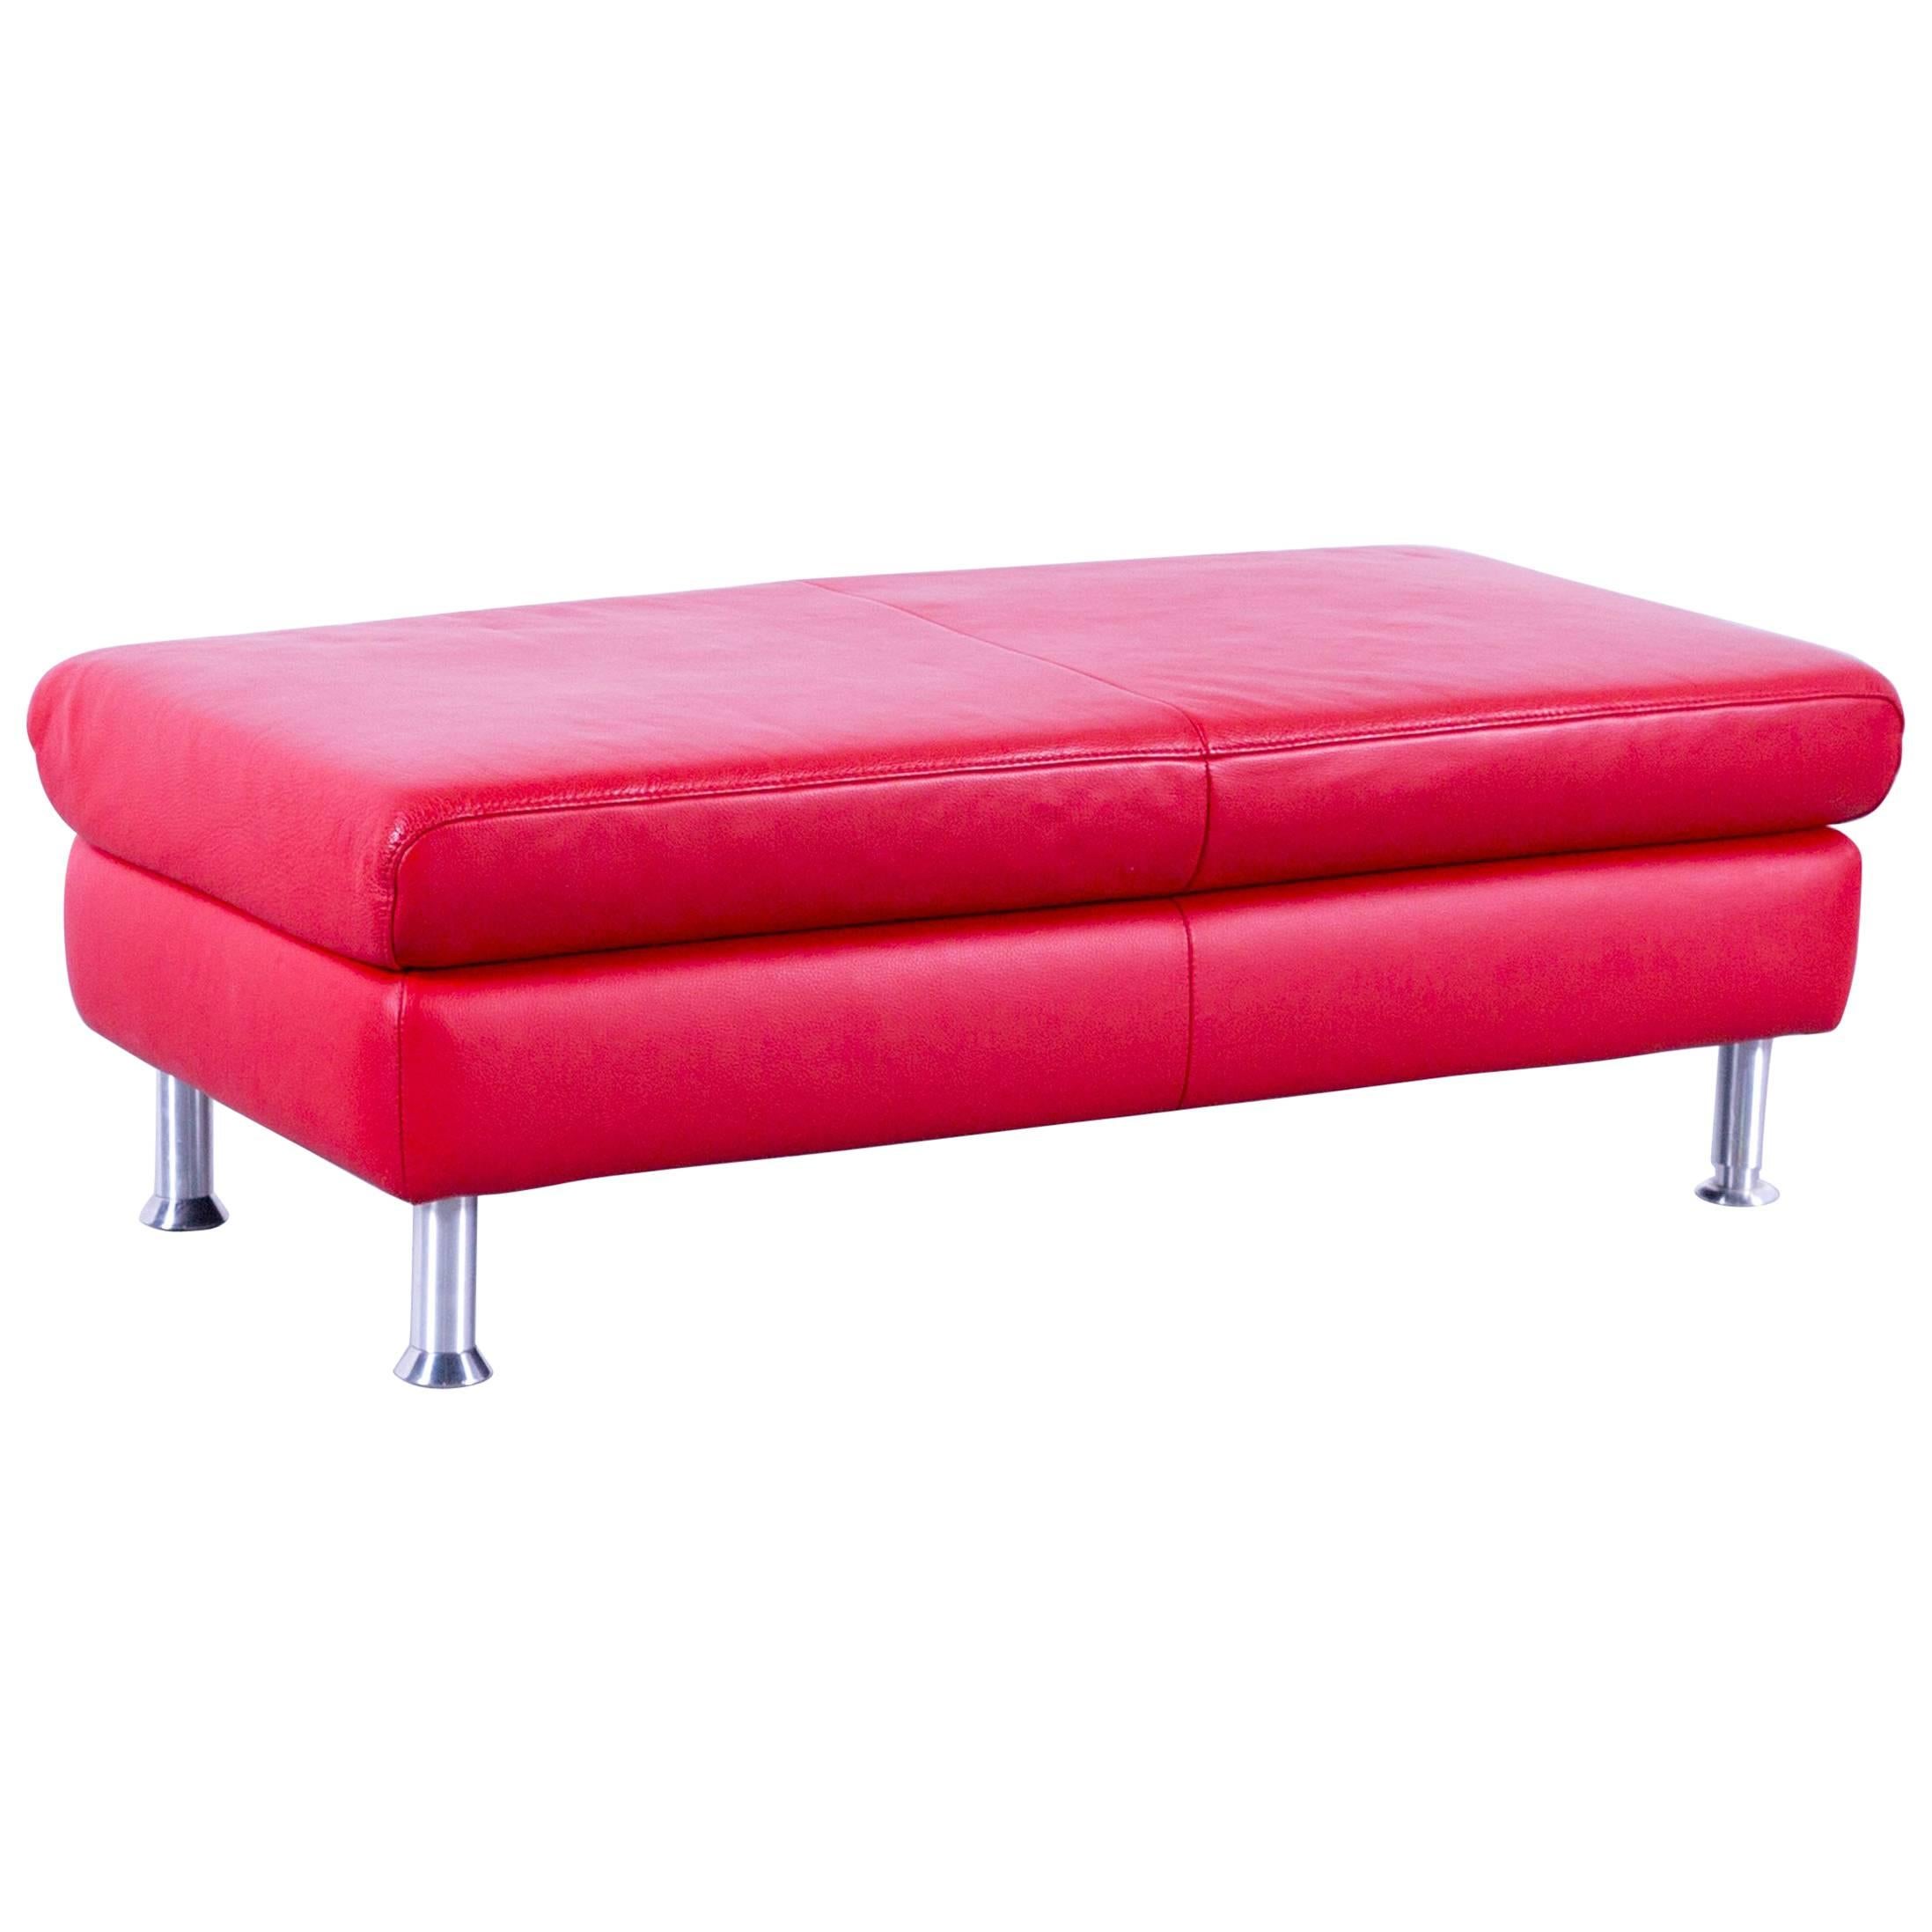 Willi Schillig Designer Leather Foot Stool Red Pouff Modern Couch For Sale